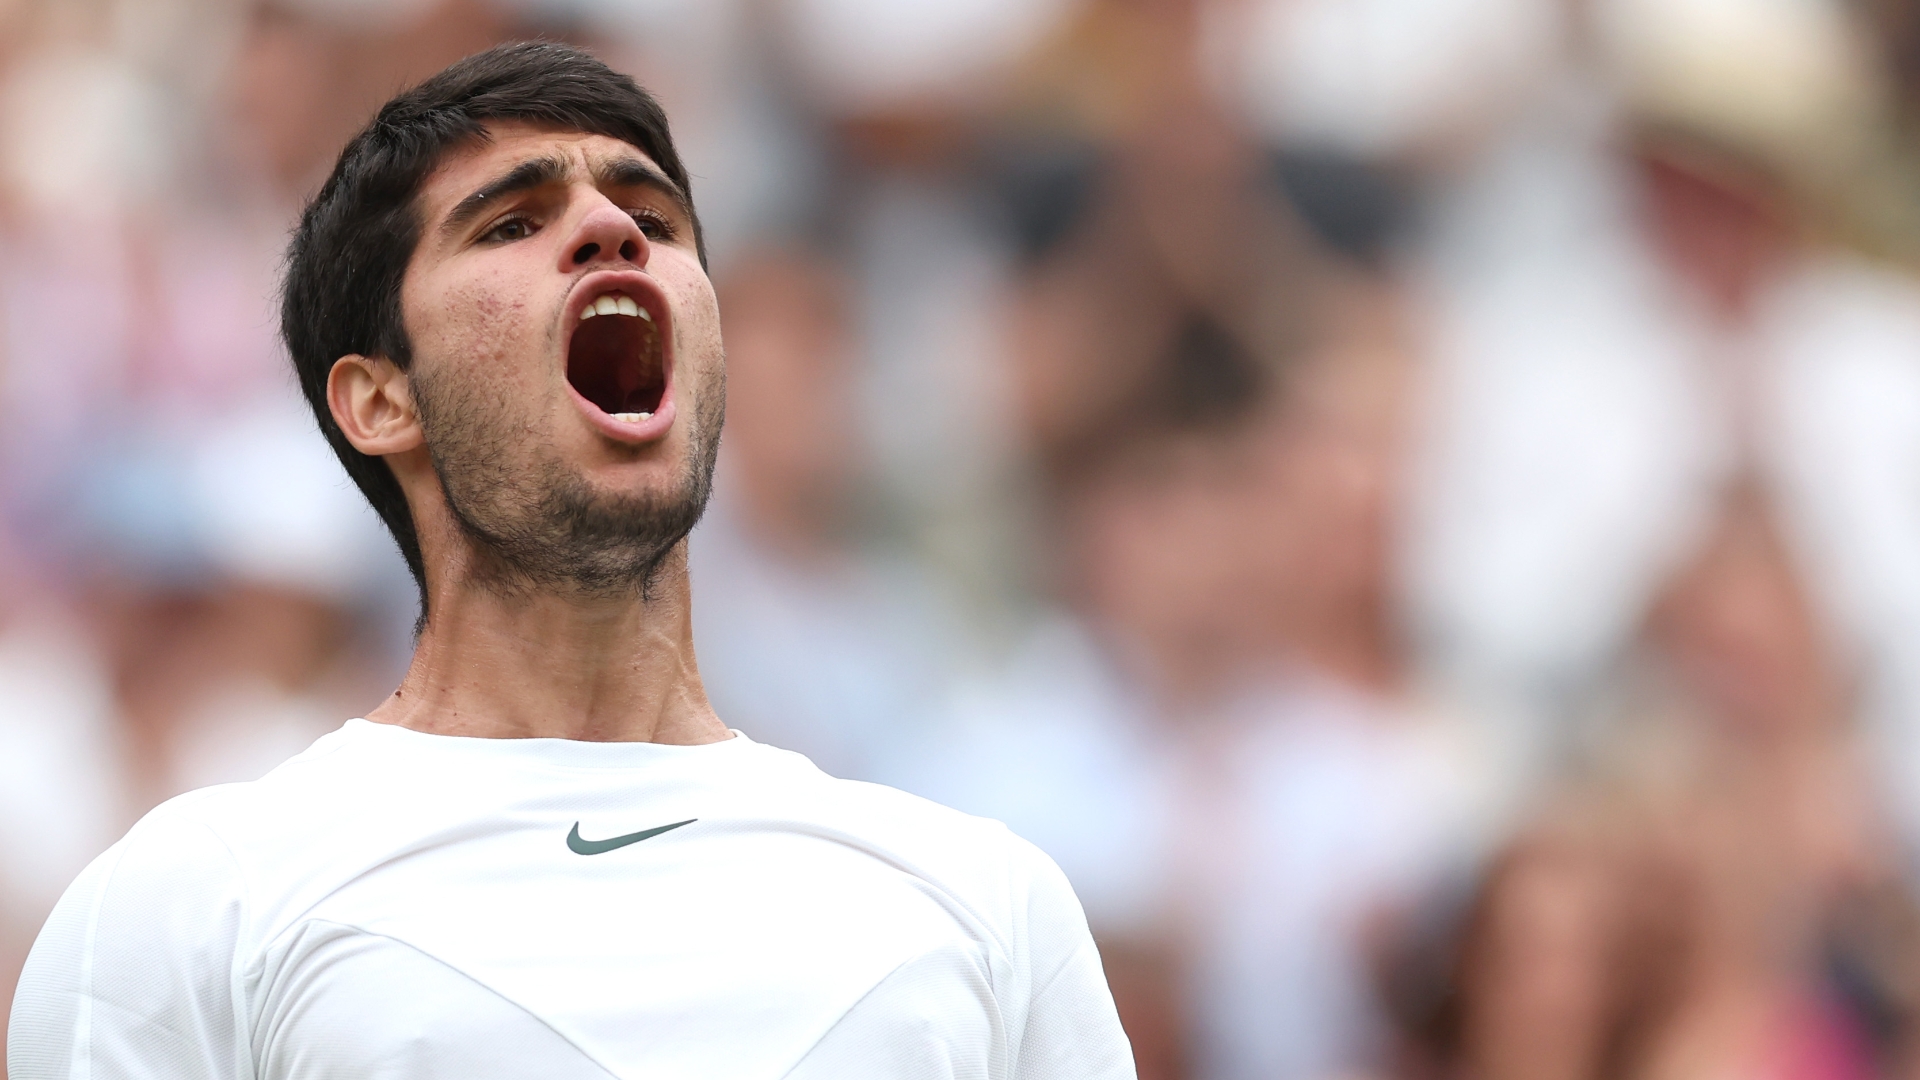 Alcaraz passes first test to move on at Wimbledon - Stream the Video